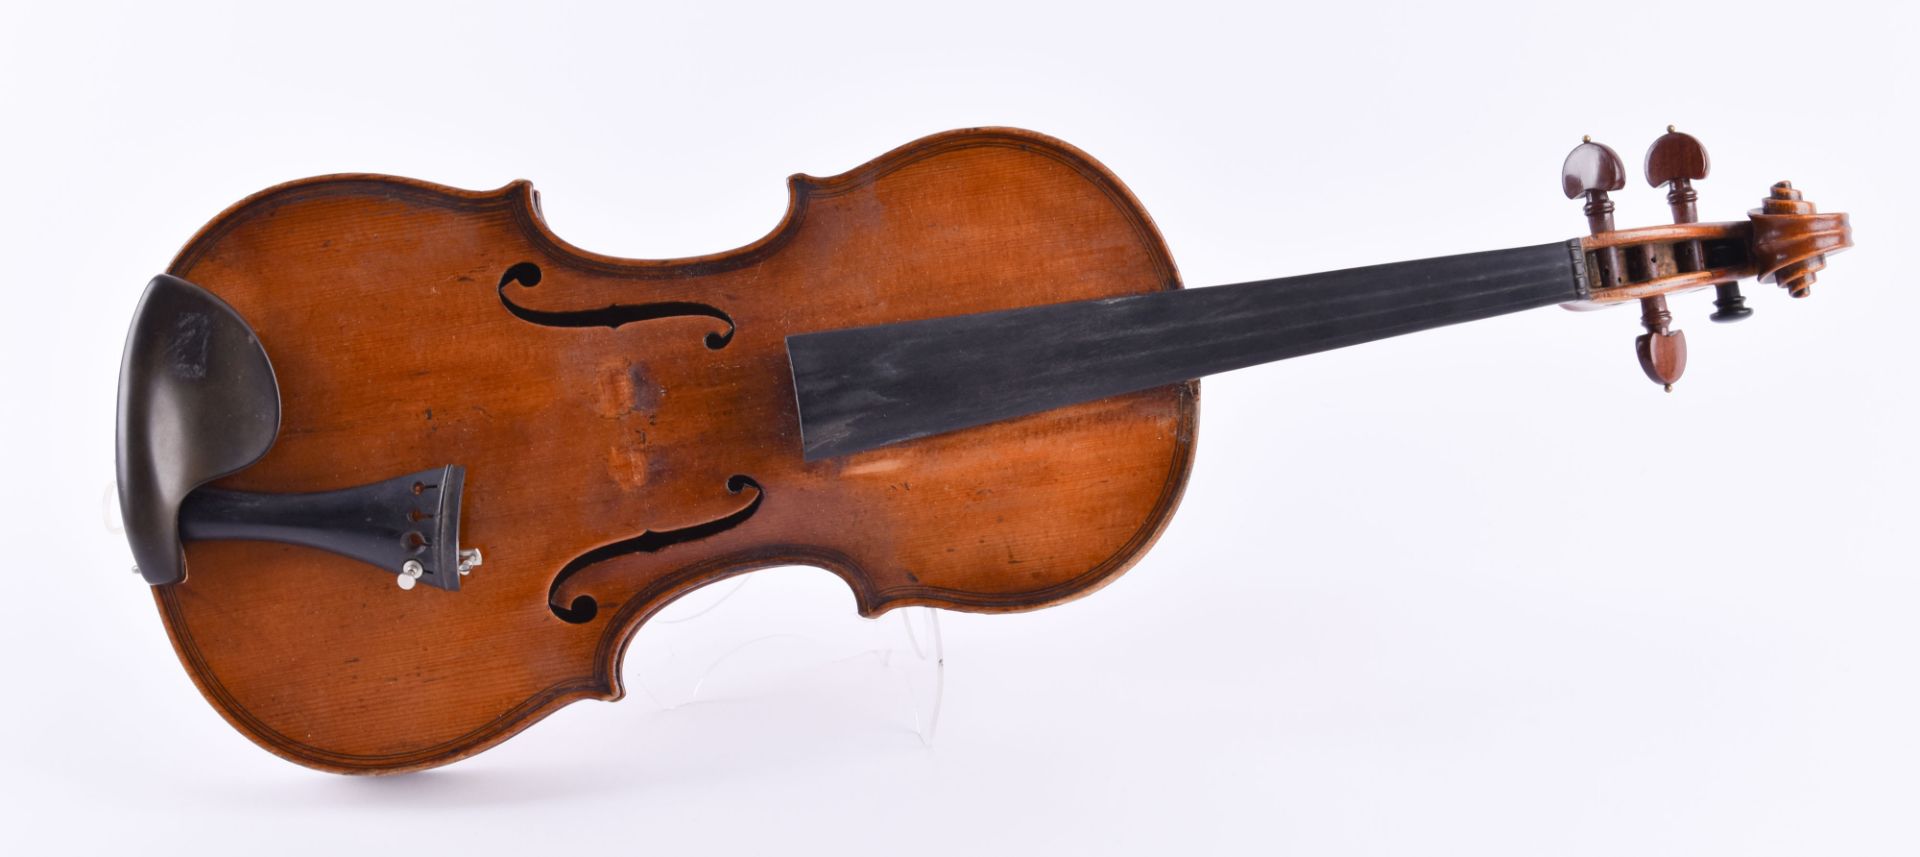 Baroque violinvery good wood and very well varnished, body in original condition, there is lacquer